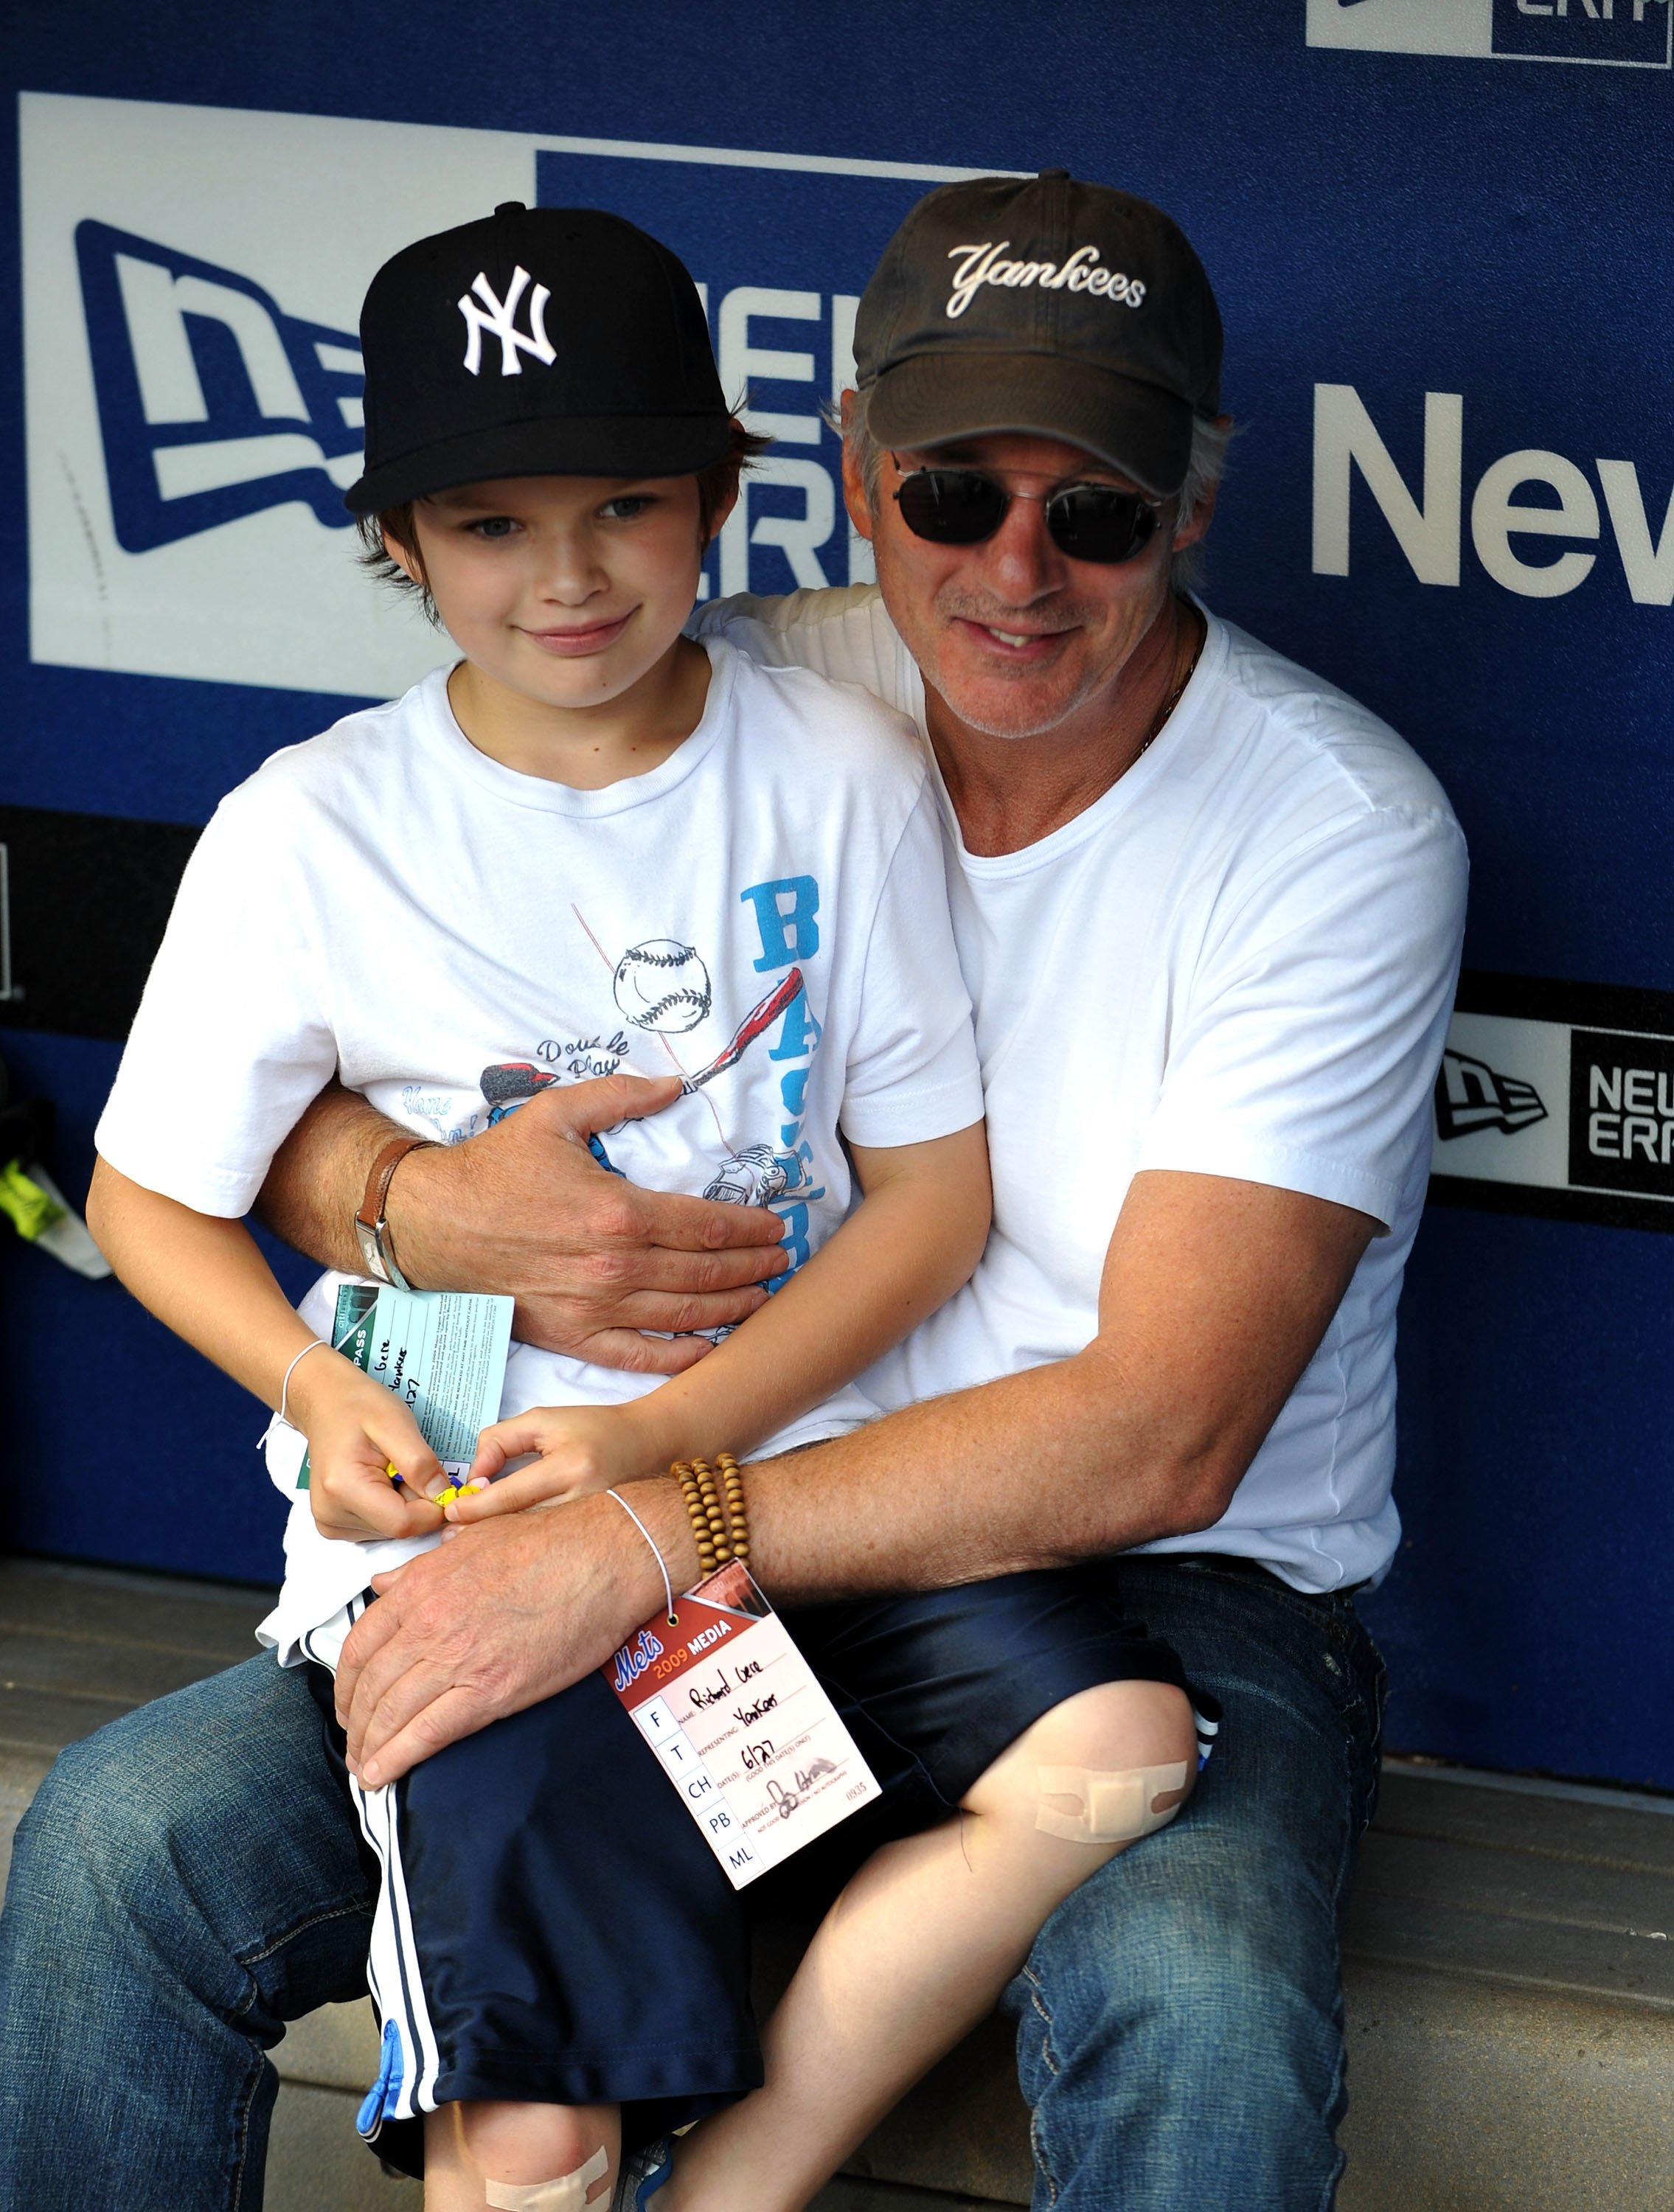 Actor Richard Gere and his son Homer at the New York Subway Series game between the Mets and Yannkees at Citi Field on June 26, 2009 in New York, New York. | Source: Getty Images